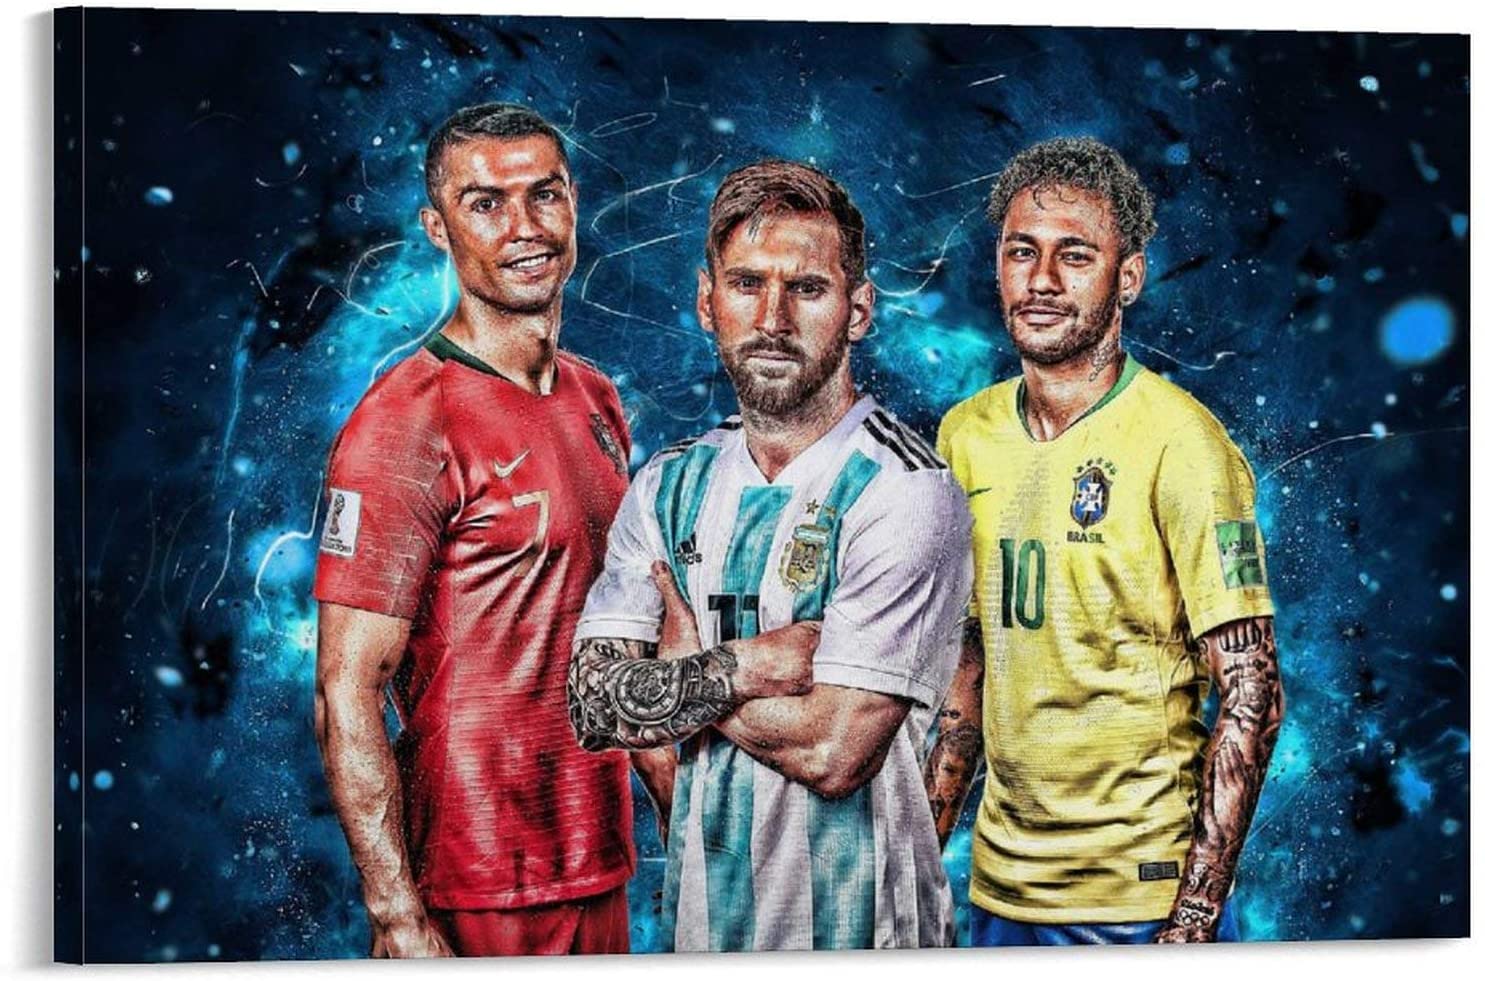 Cristiano Ronaldo Lionel Messi Neymar Jr Wallpaper Football Comprehensive Poster Famous Sports Star Poster Poster Canvas Wall Art Print Decorative Painting Artwork 12x18inch(30x45cm), Everything Else